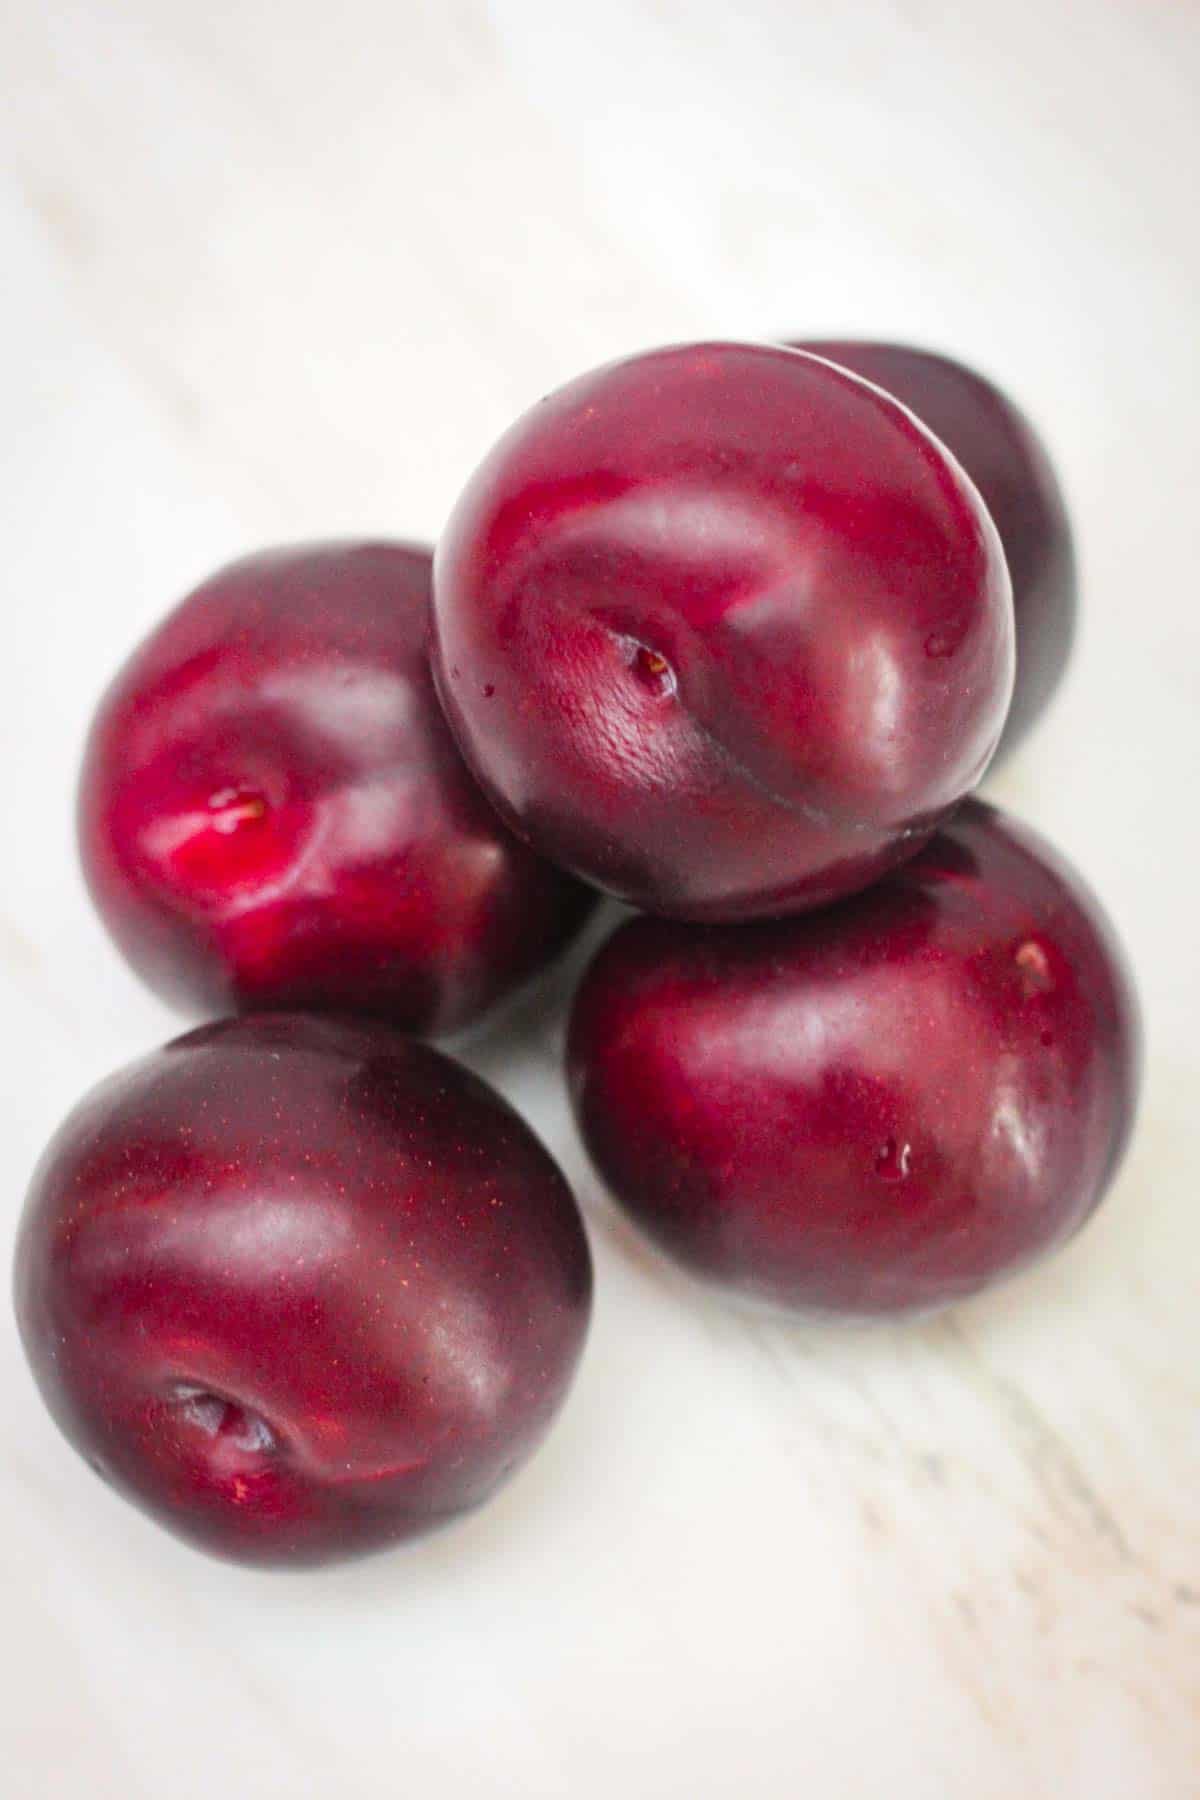 About 5 plums next to each other, on a counter.